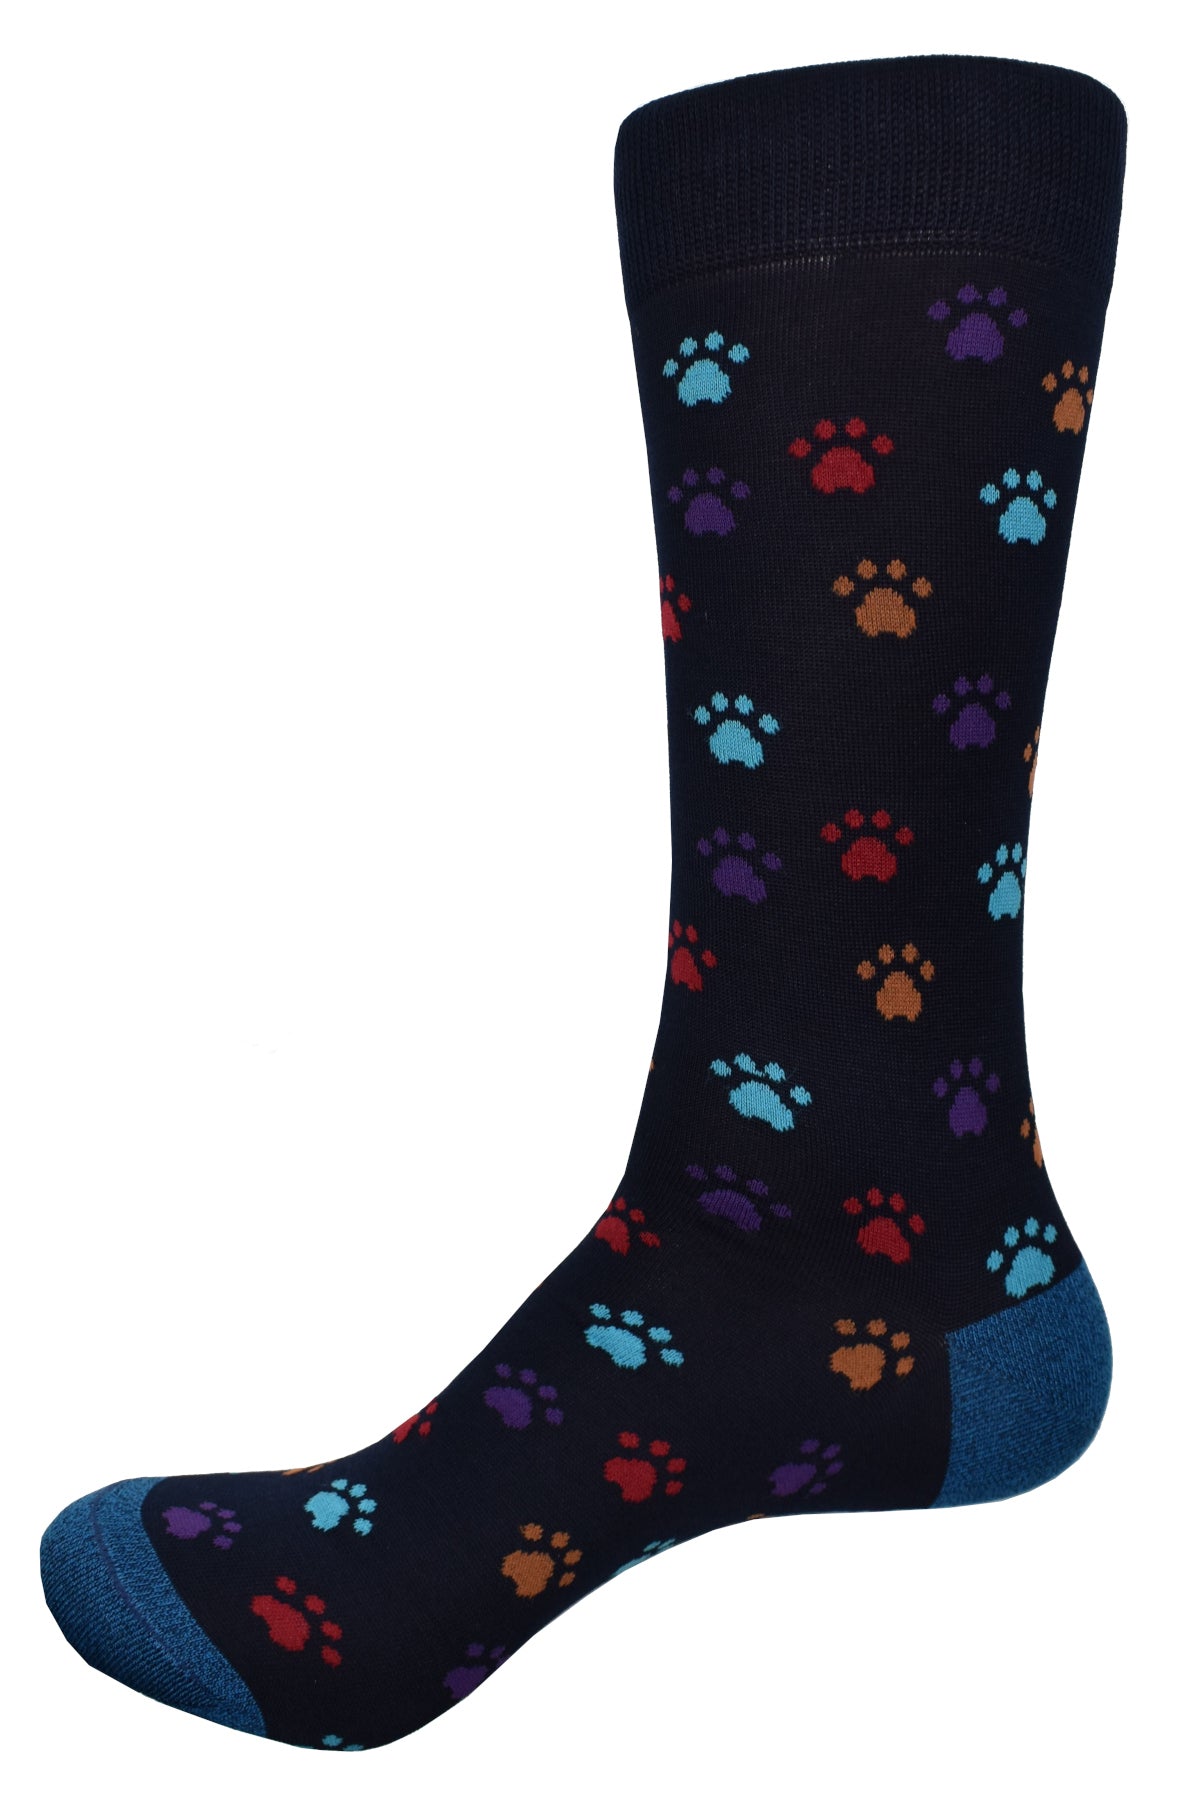 Indulge in ultimate luxury with our mercerized cotton and nylon socks. Made from high-quality materials, these socks not only provide comfort, but also showcase a playful multi color paw print motif. Elevate your sock game and make a statement.